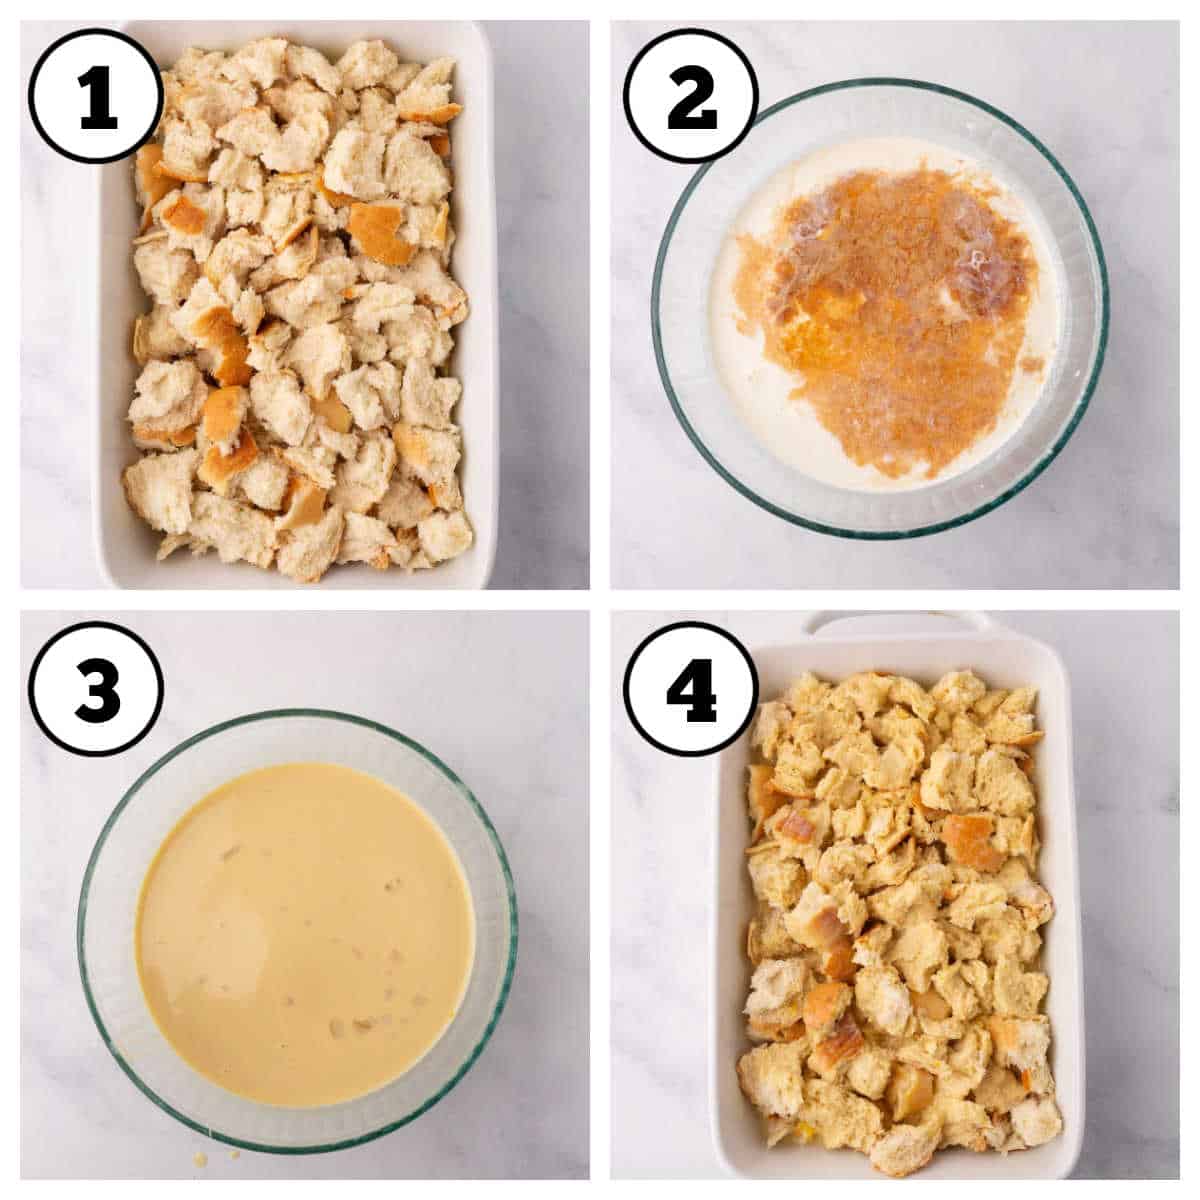 Steps 1-4 of French toast bake process.